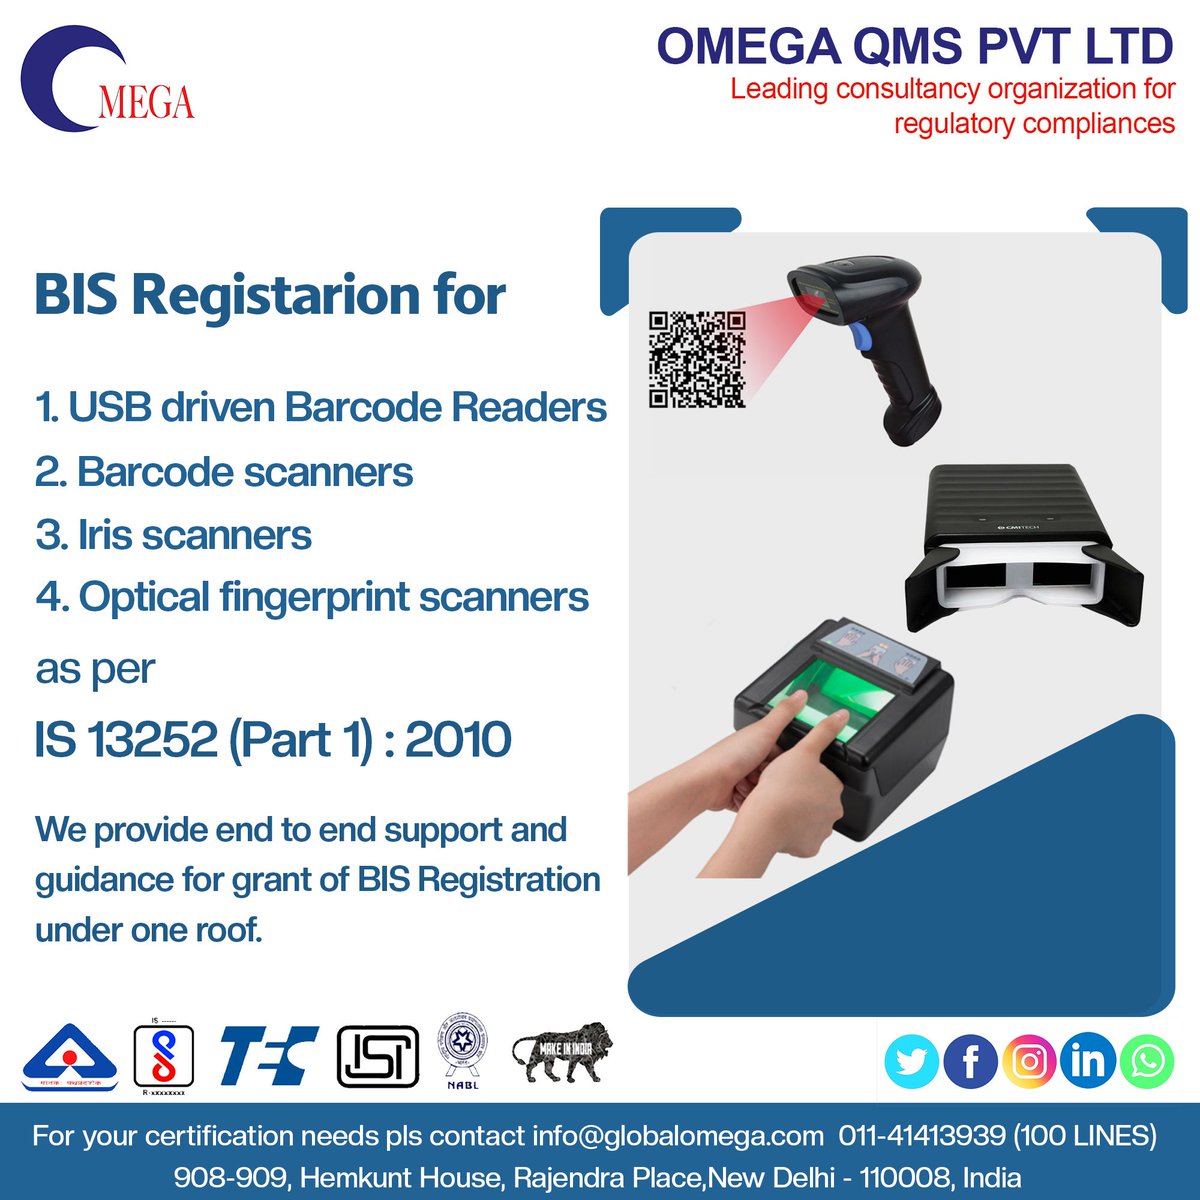 Get your Certificate Call us at:

📞  011-41413939 (100 LINES)
📧  info@globalomega.com
🌐 buff.ly/4as818R

#biscertification #isimark #bislicense #regulatorycompliance #fmcs #globalomega